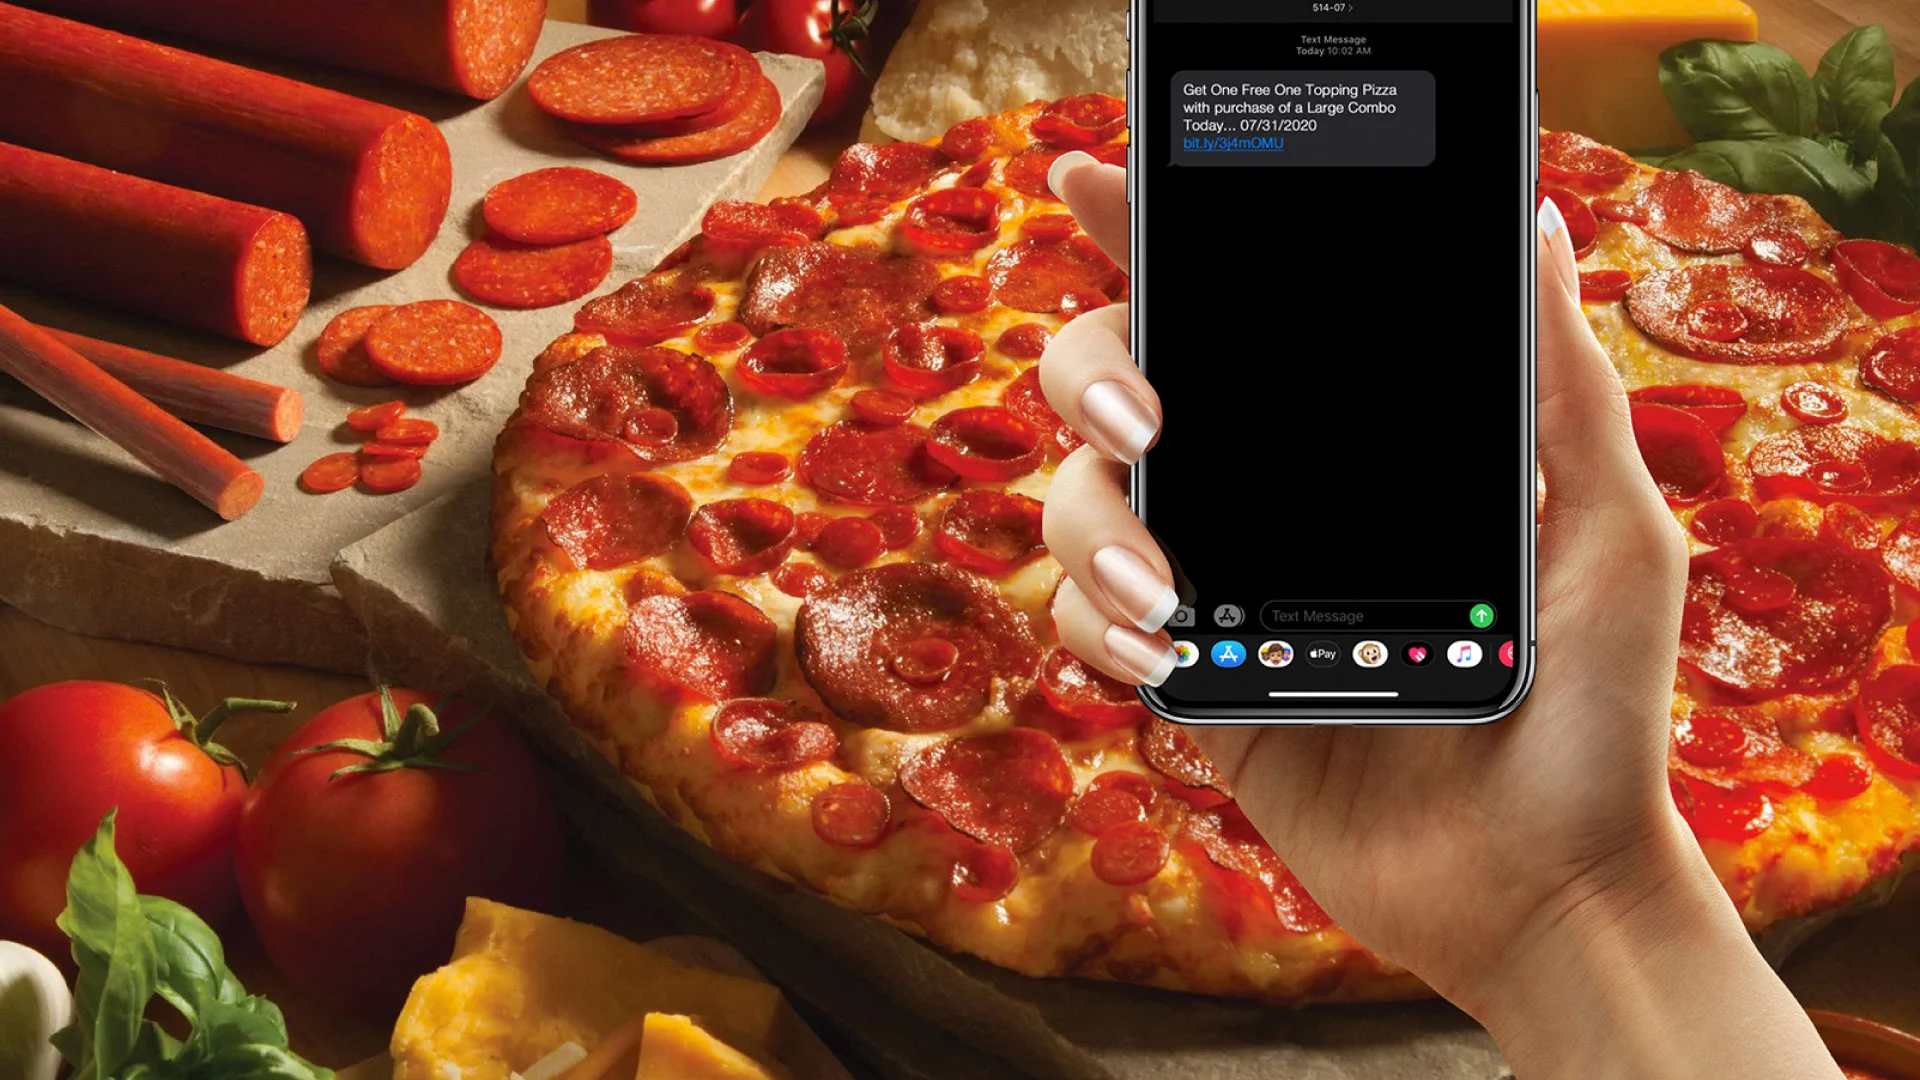 Restaurant Chain Mobile Message-Based Campaign Proves Old Adages